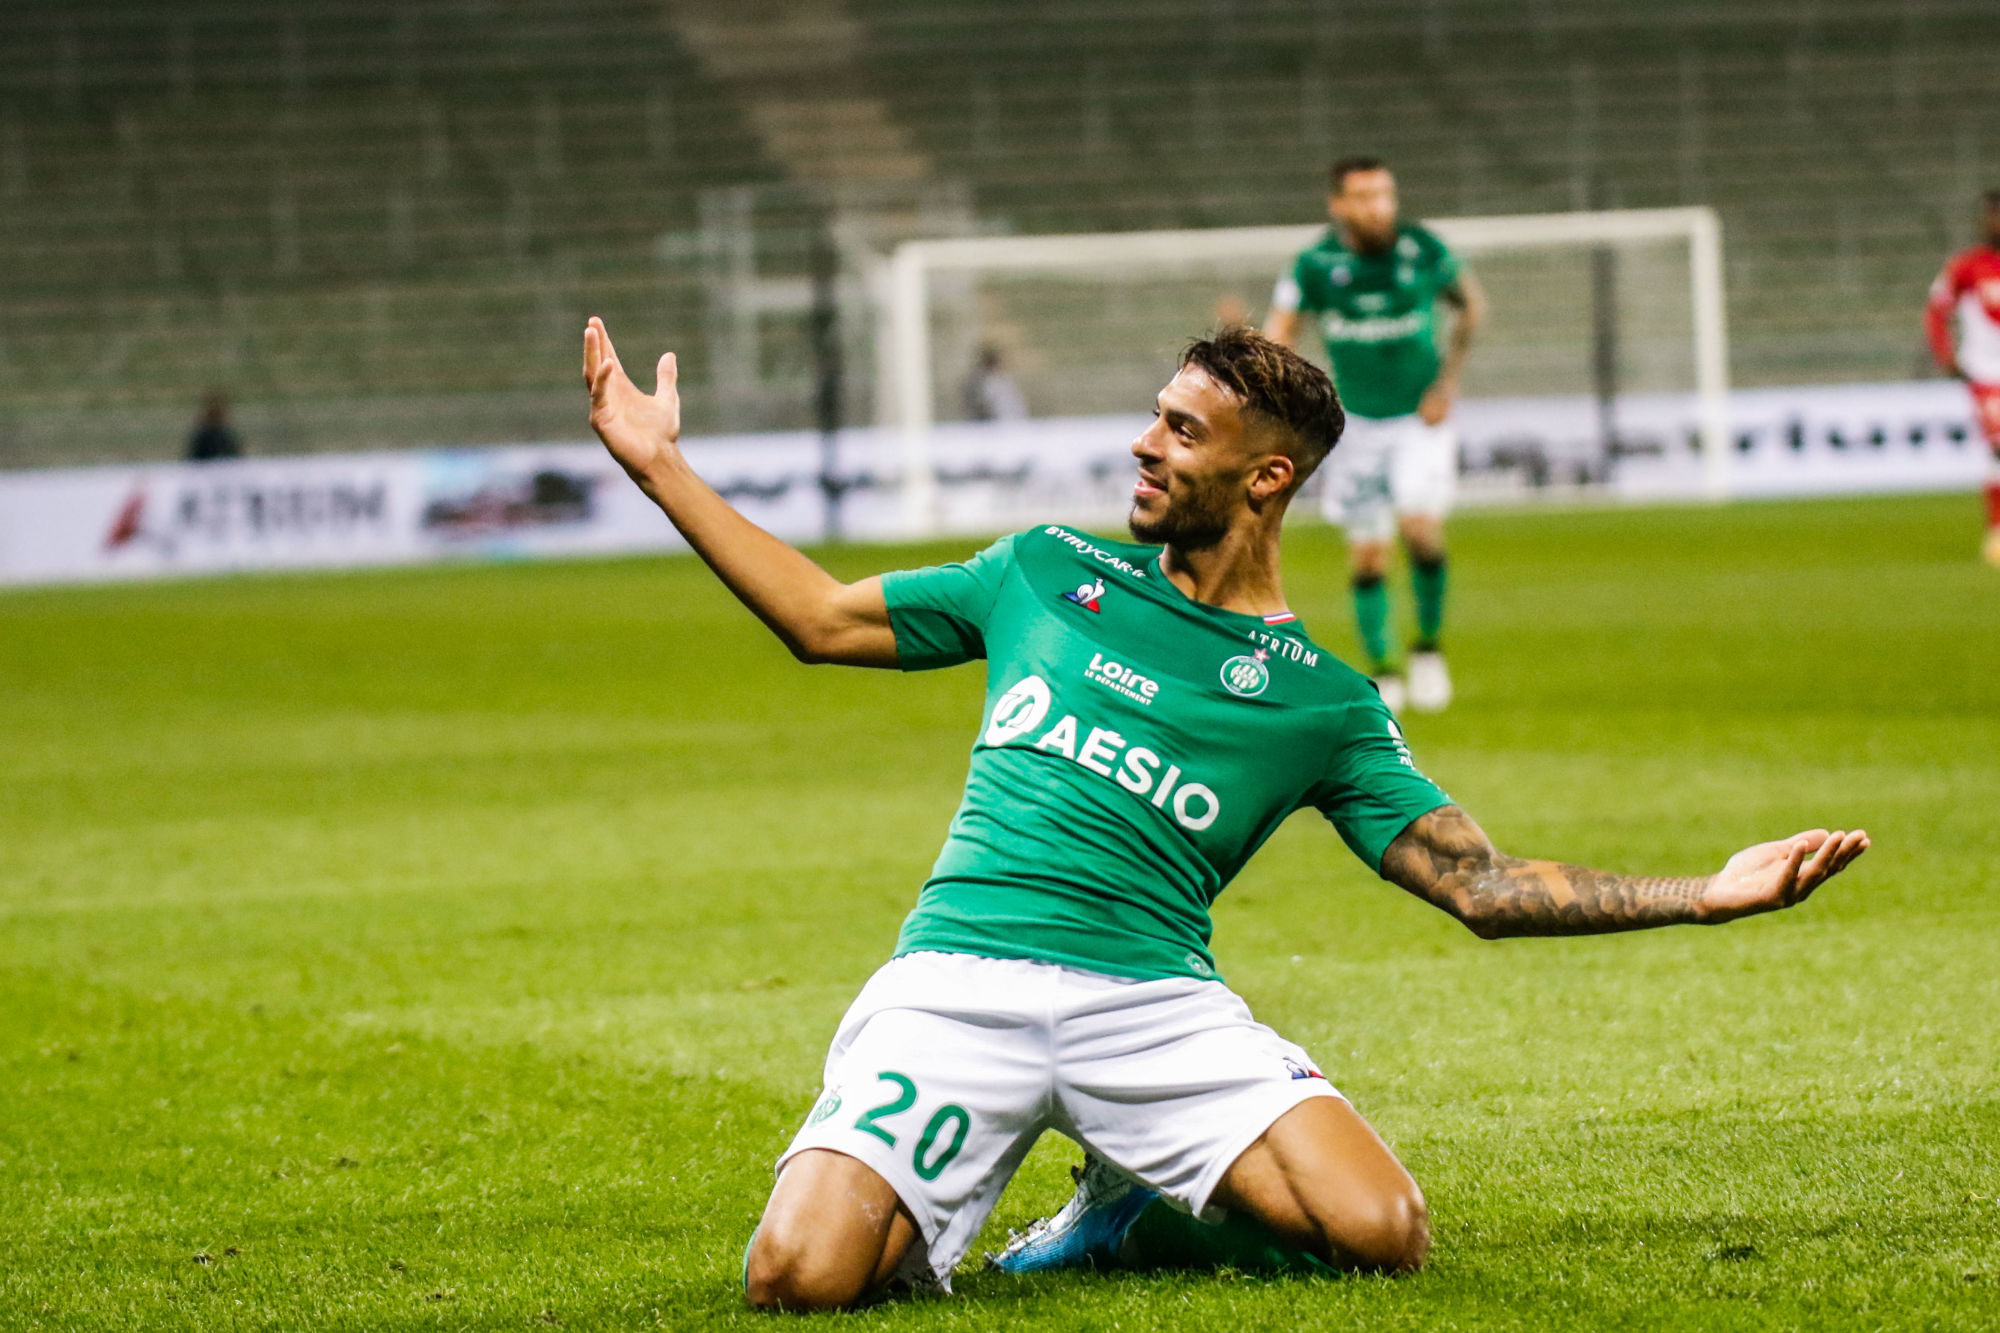 Denis BOUANGA of Saint Etienne celebrate his goal during the Ligue 1 match between AS Saint-Etienne and AS Monaco at Stade Geoffroy-Guichard on November 2, 2019 in Saint-Etienne, France. (Photo by Romain Biard/Icon Sport) - Denis BOUANGA - Stade Geoffroy-Guichard - Saint Etienne (France)